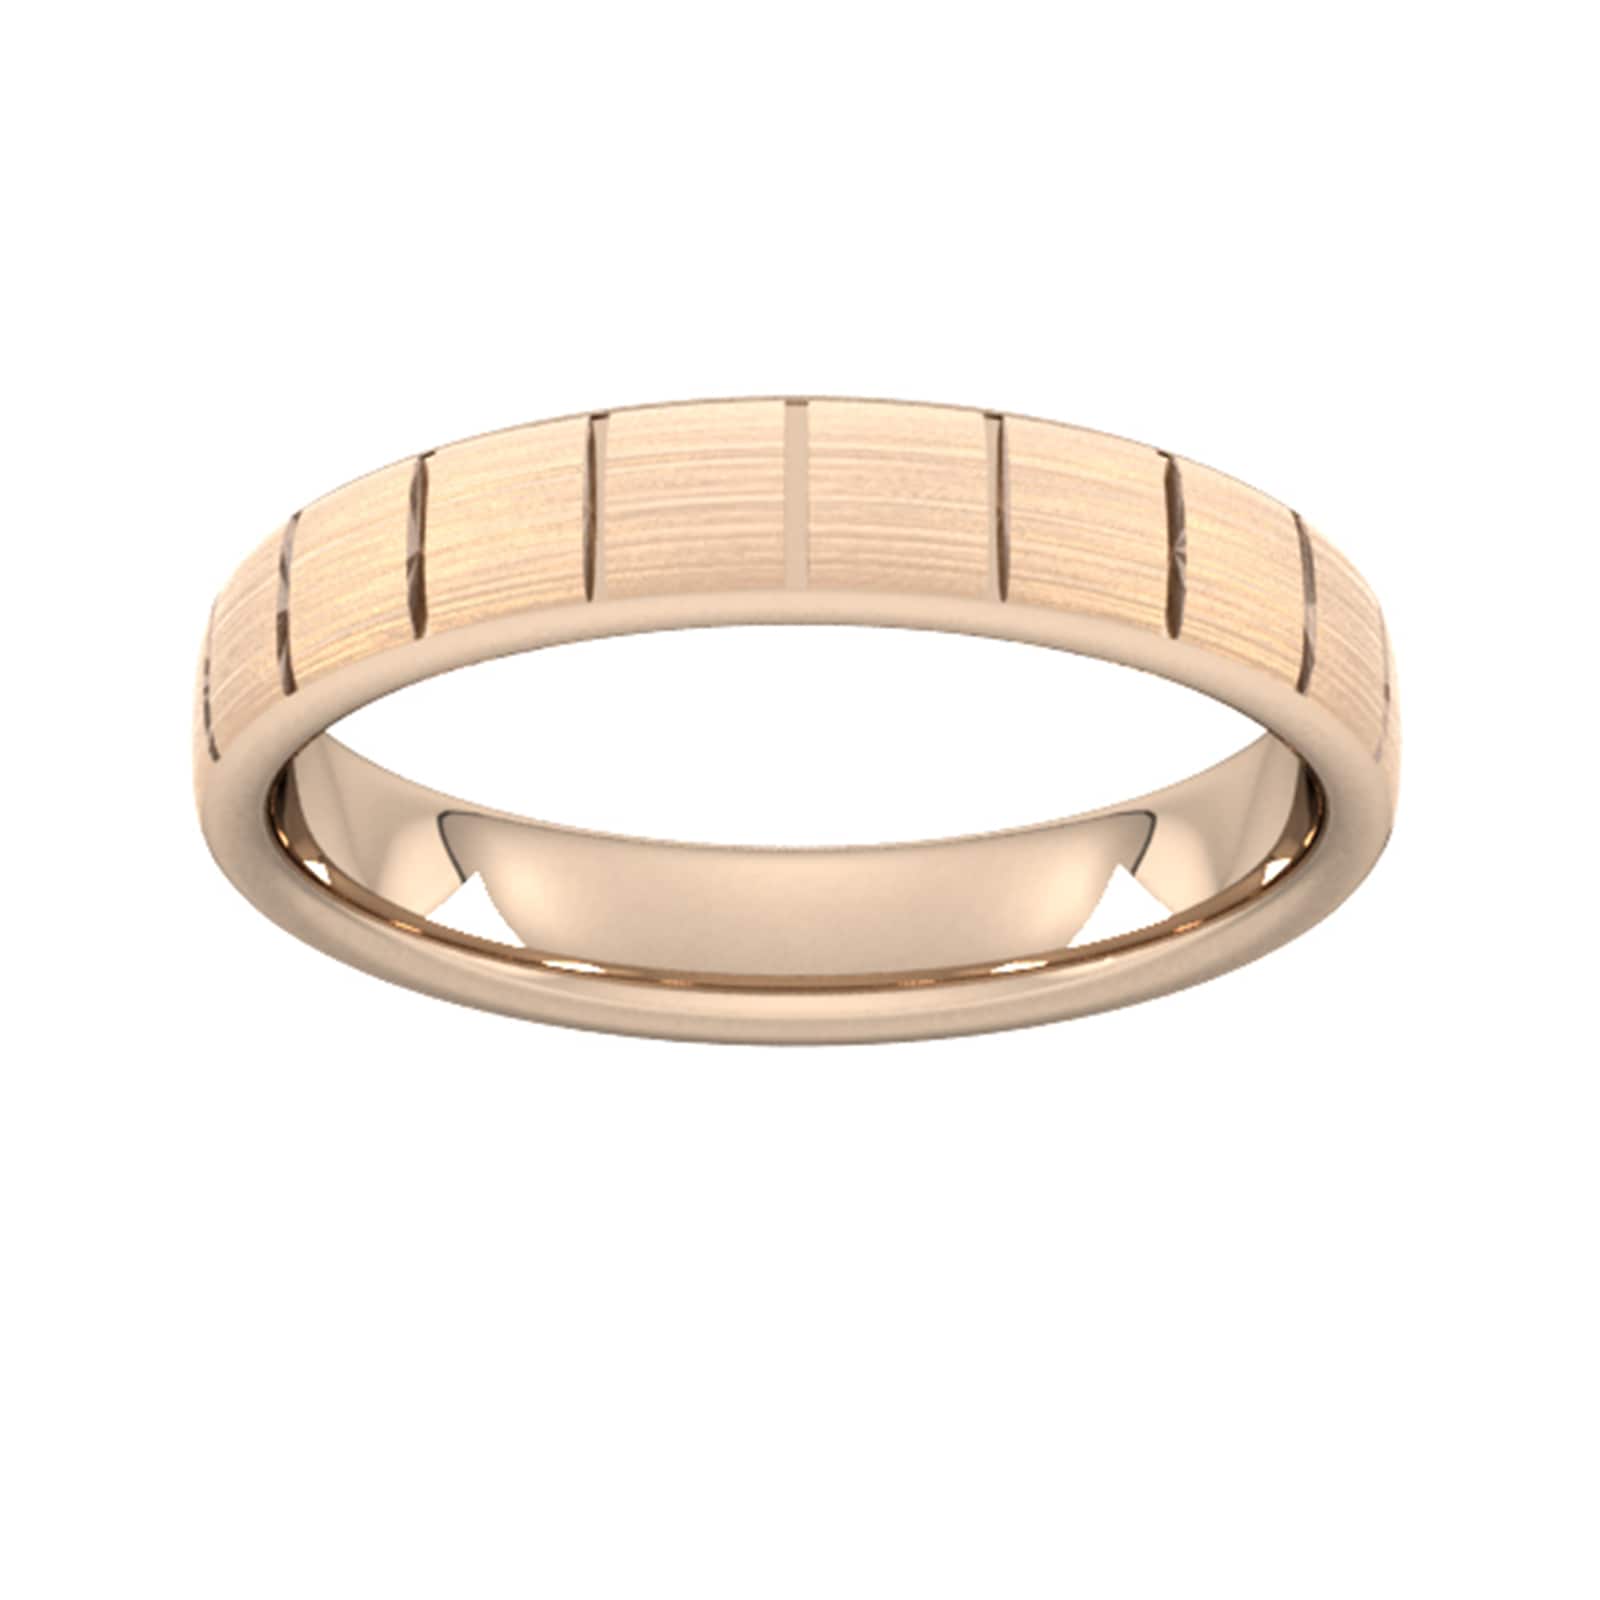 4mm Slight Court Heavy Vertical Lines Wedding Ring In 9 Carat Rose Gold - Ring Size Q